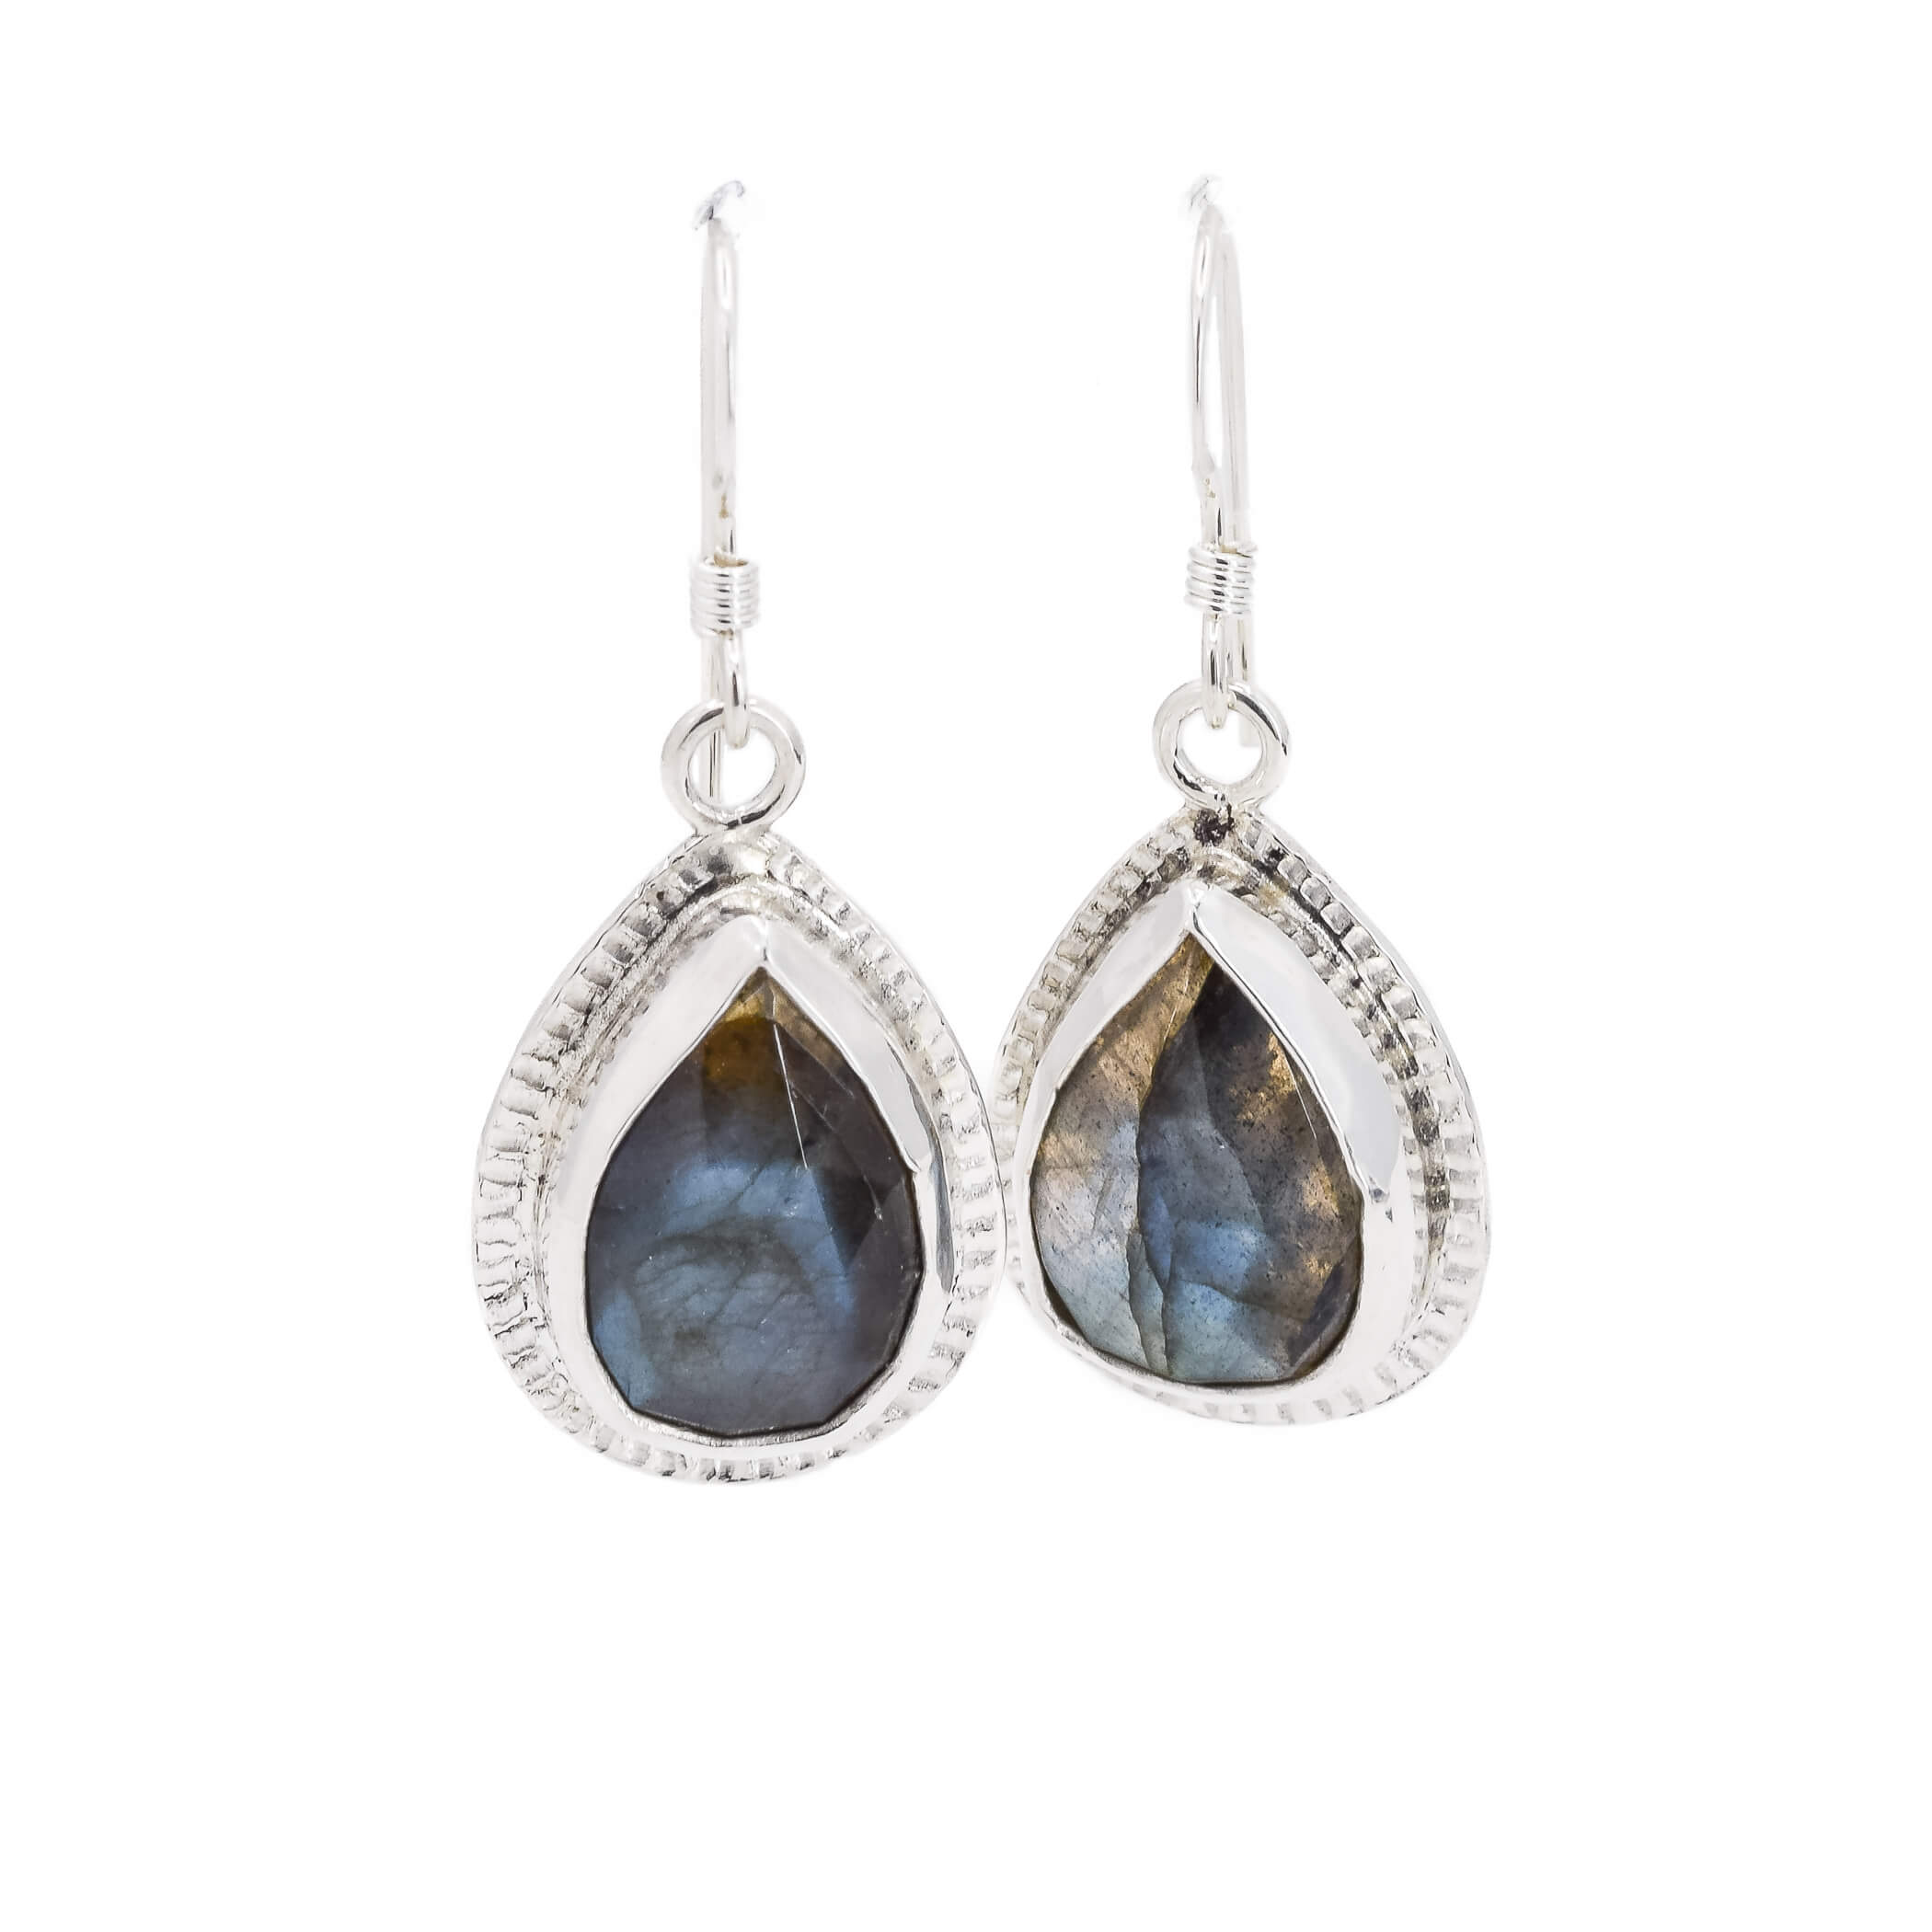 Teardrop shaped labradrotie drop earrings set in sterling silver with a detailed border adorning the edges of the stones